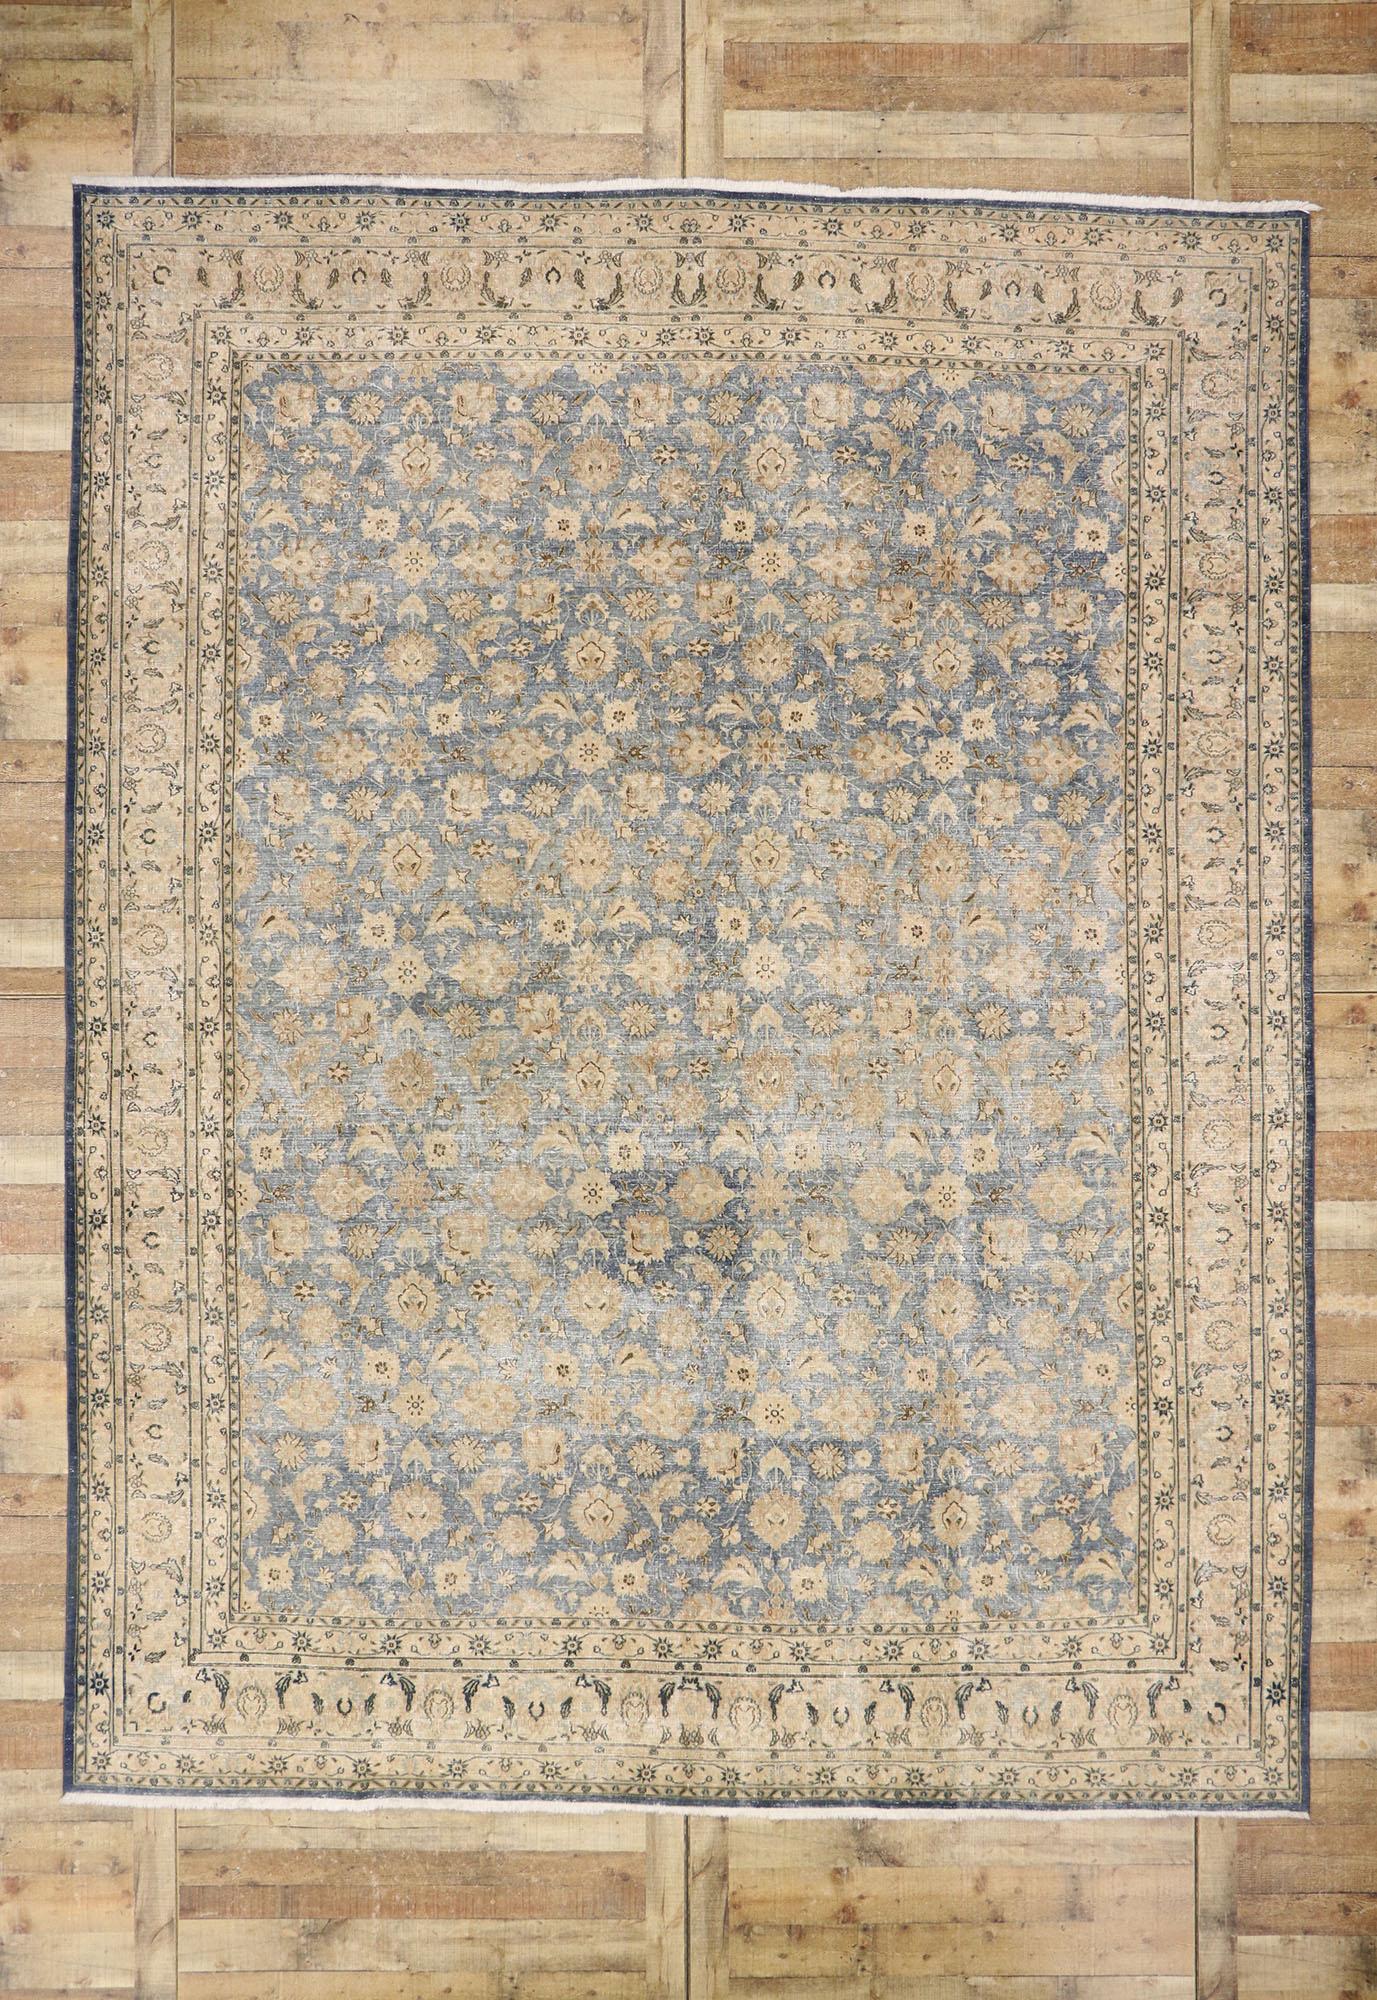 Distressed Vintage Persian Rug with Rustic Coastal Style 1